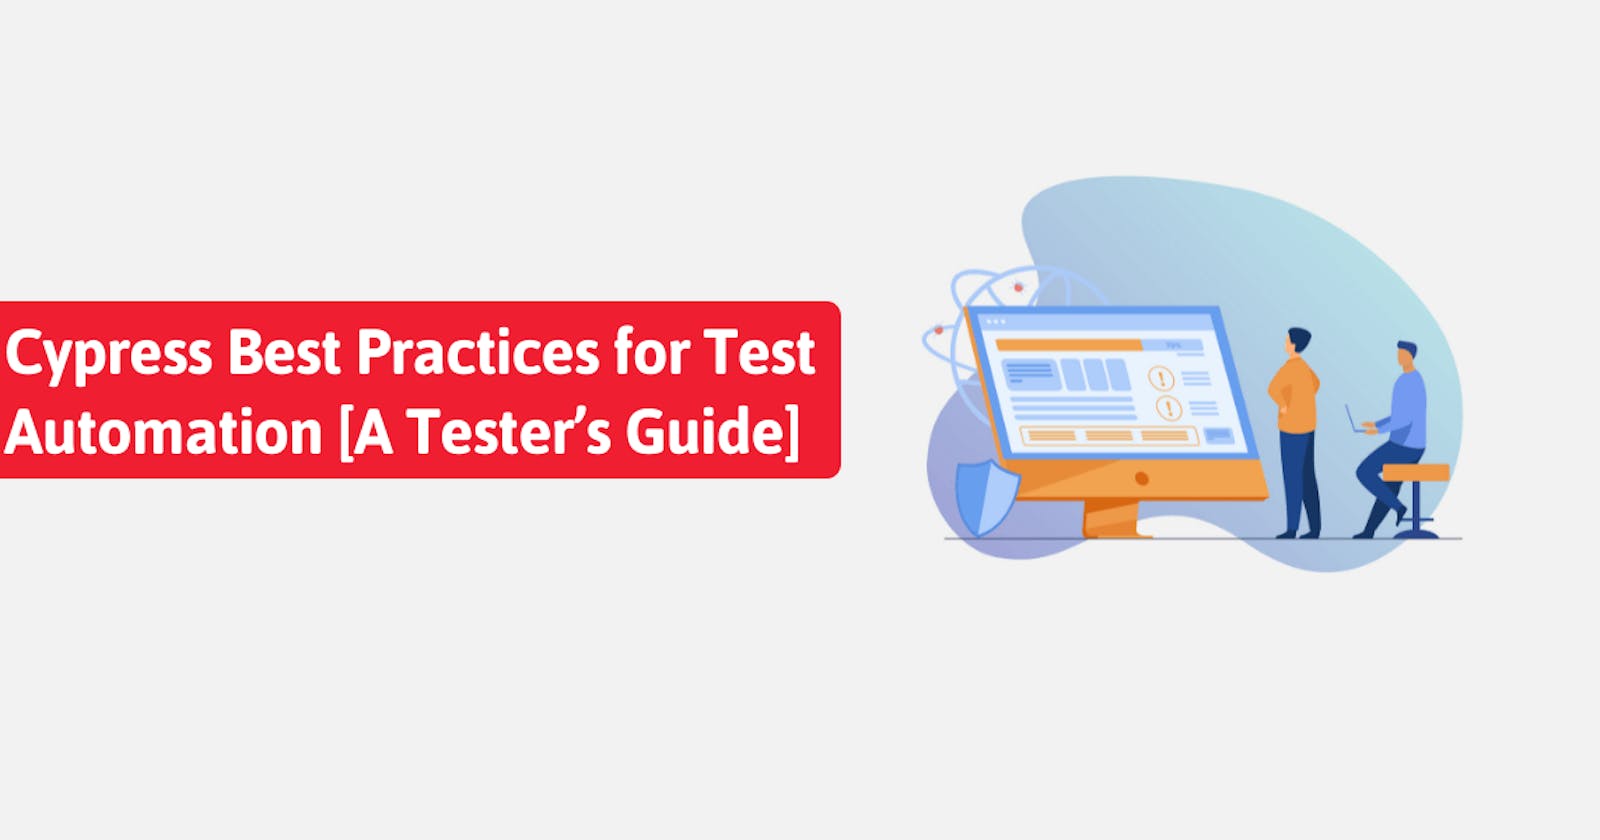 Cypress Best Practices for Test Automation [A Tester’s Guide]